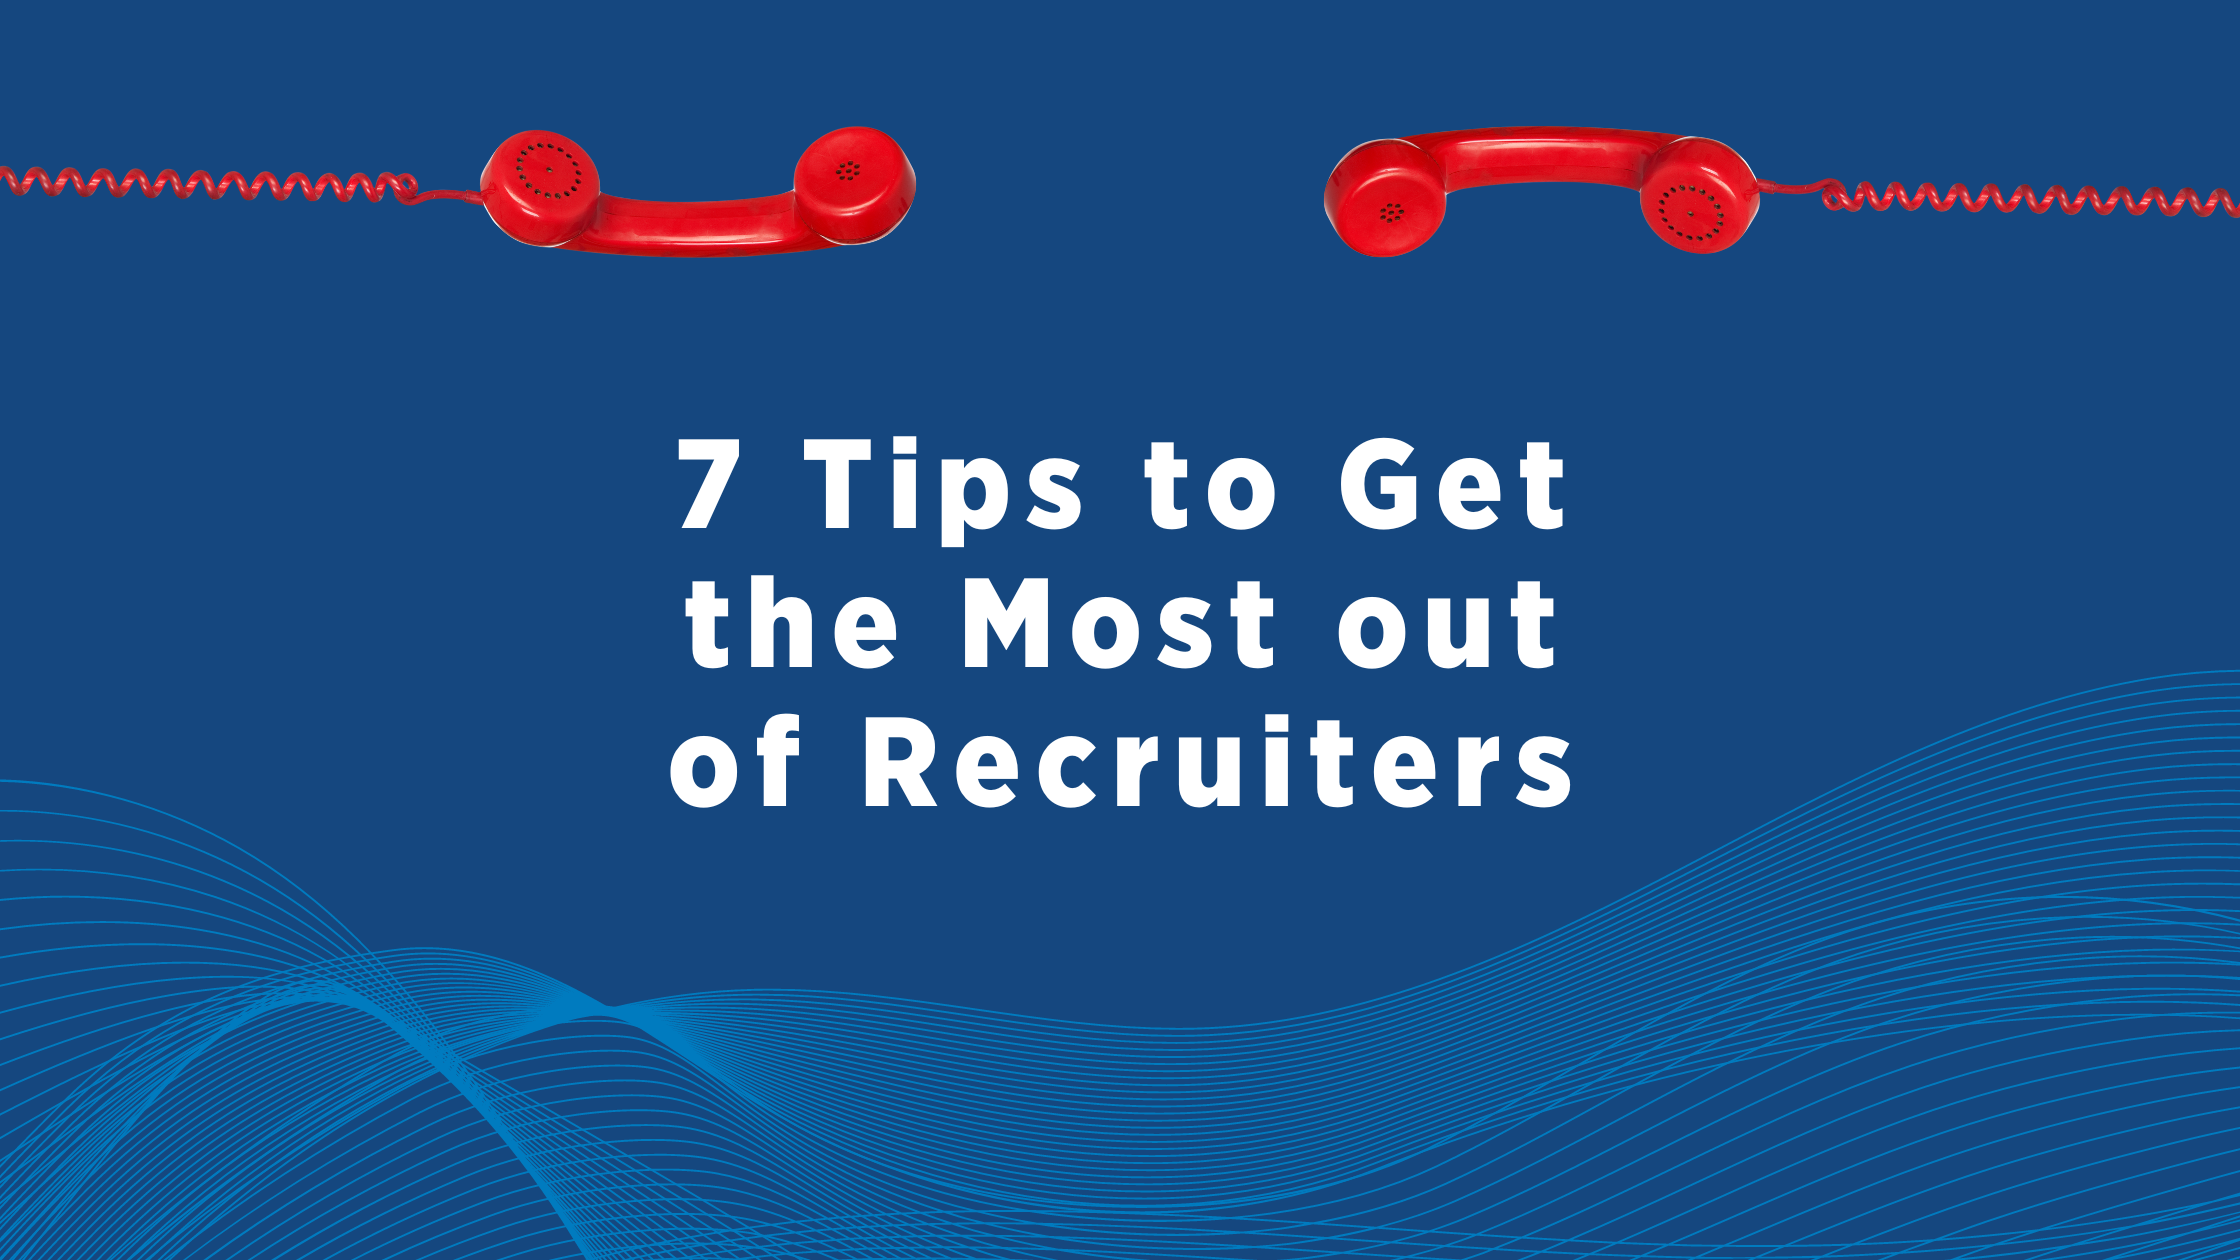 Land Your Dream Job: 7 Tips from Recruiters